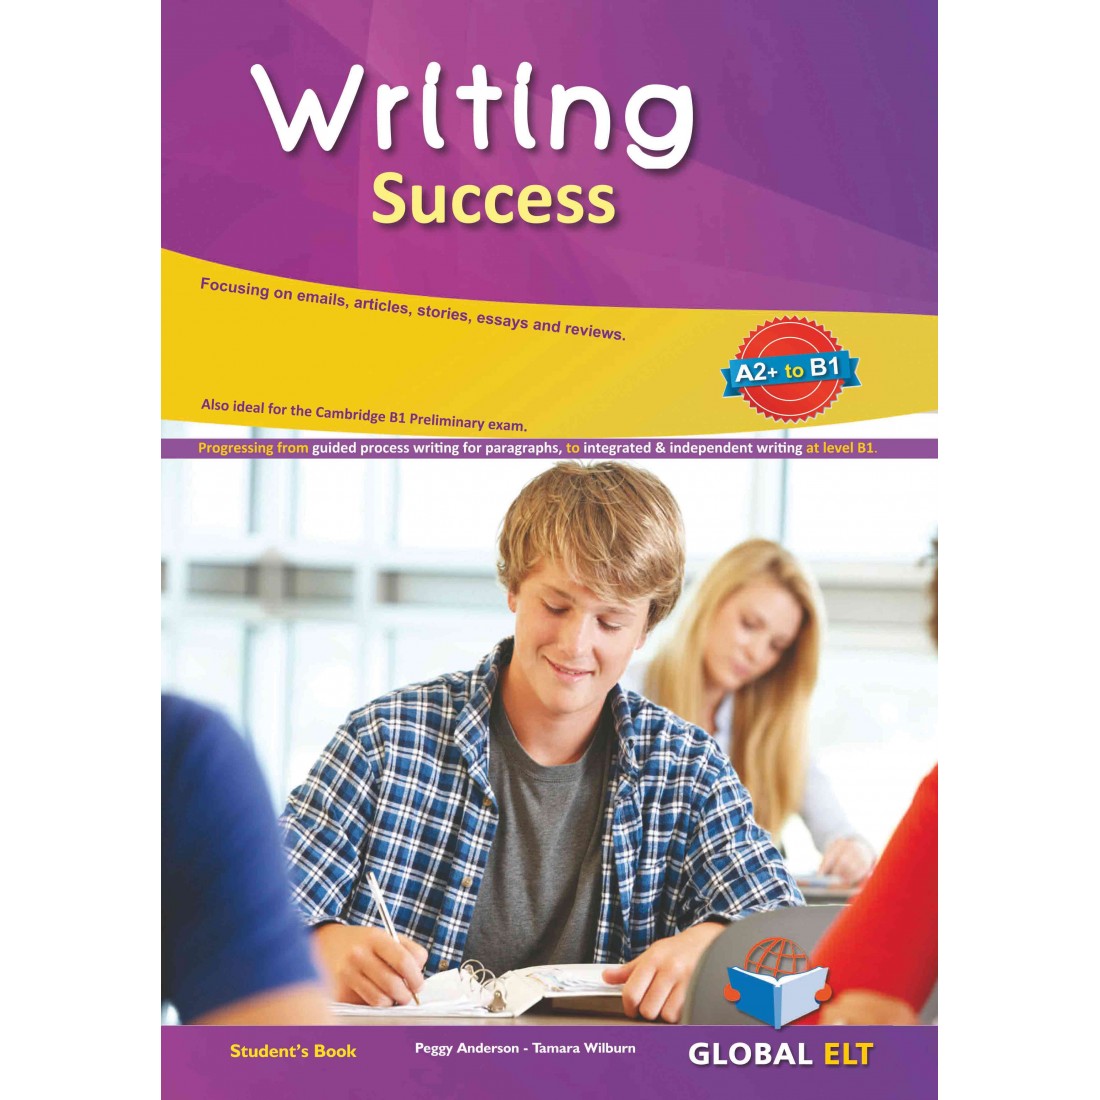 More students book. Student's book a2+. CPE Practice Tests 4. Think b1 student's book 2. B1 Business English student book.